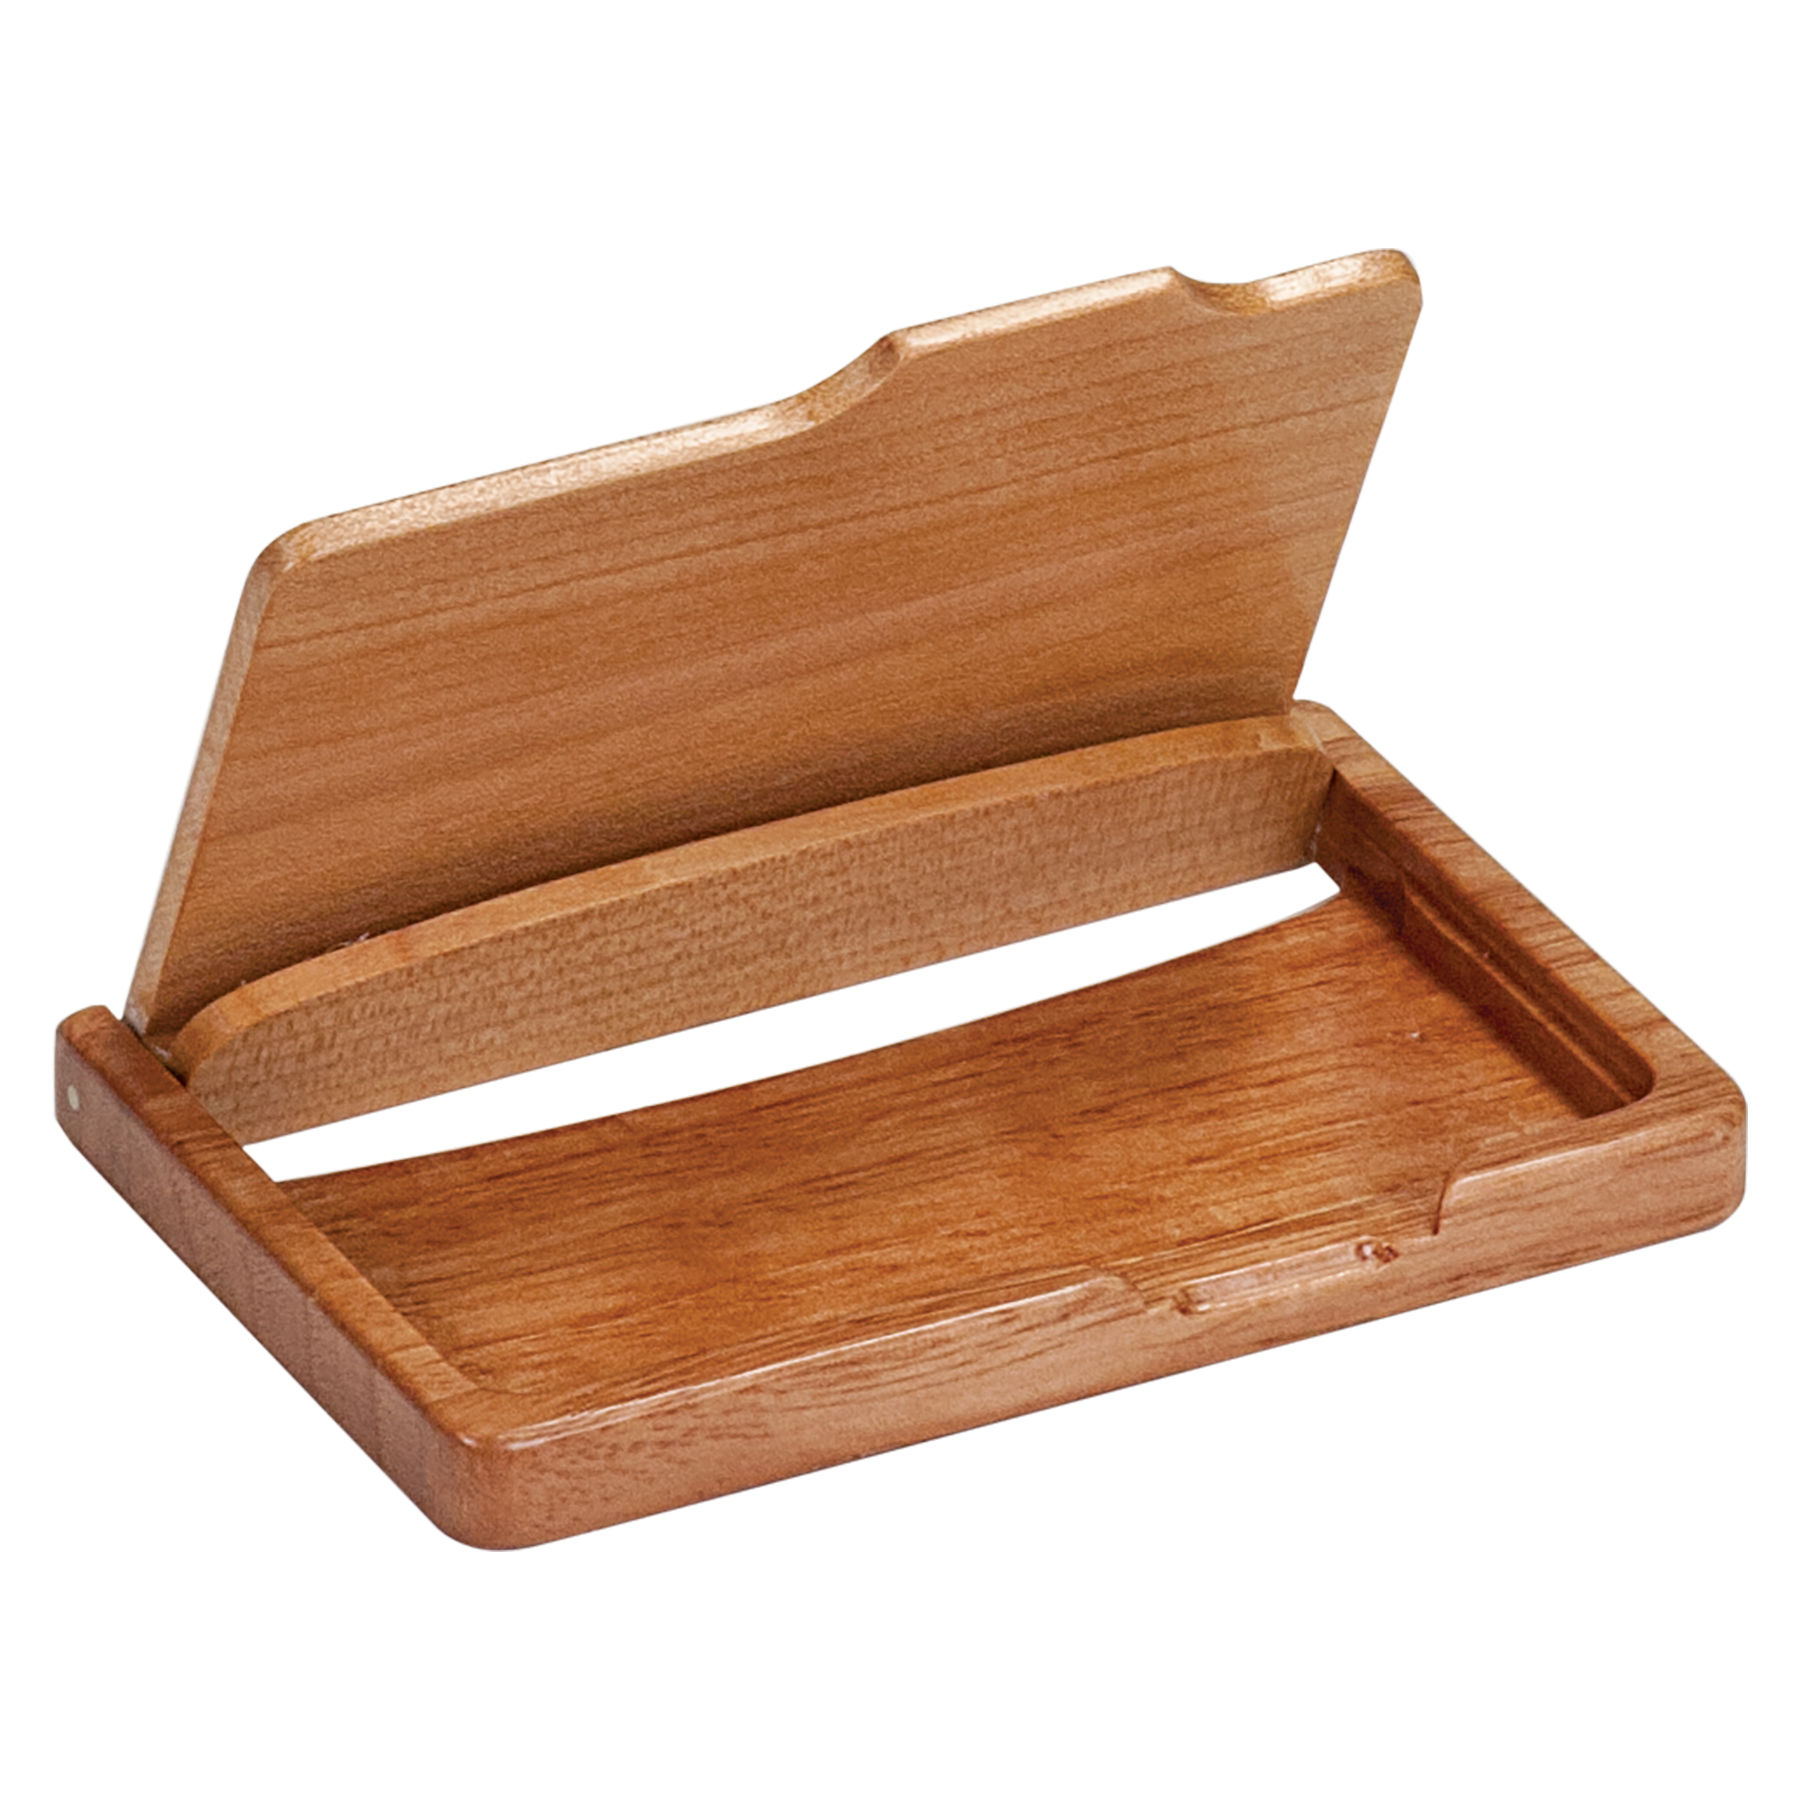 4 1/4" x 2 3/4" Maple/Rosewood Finish Business Card Holder